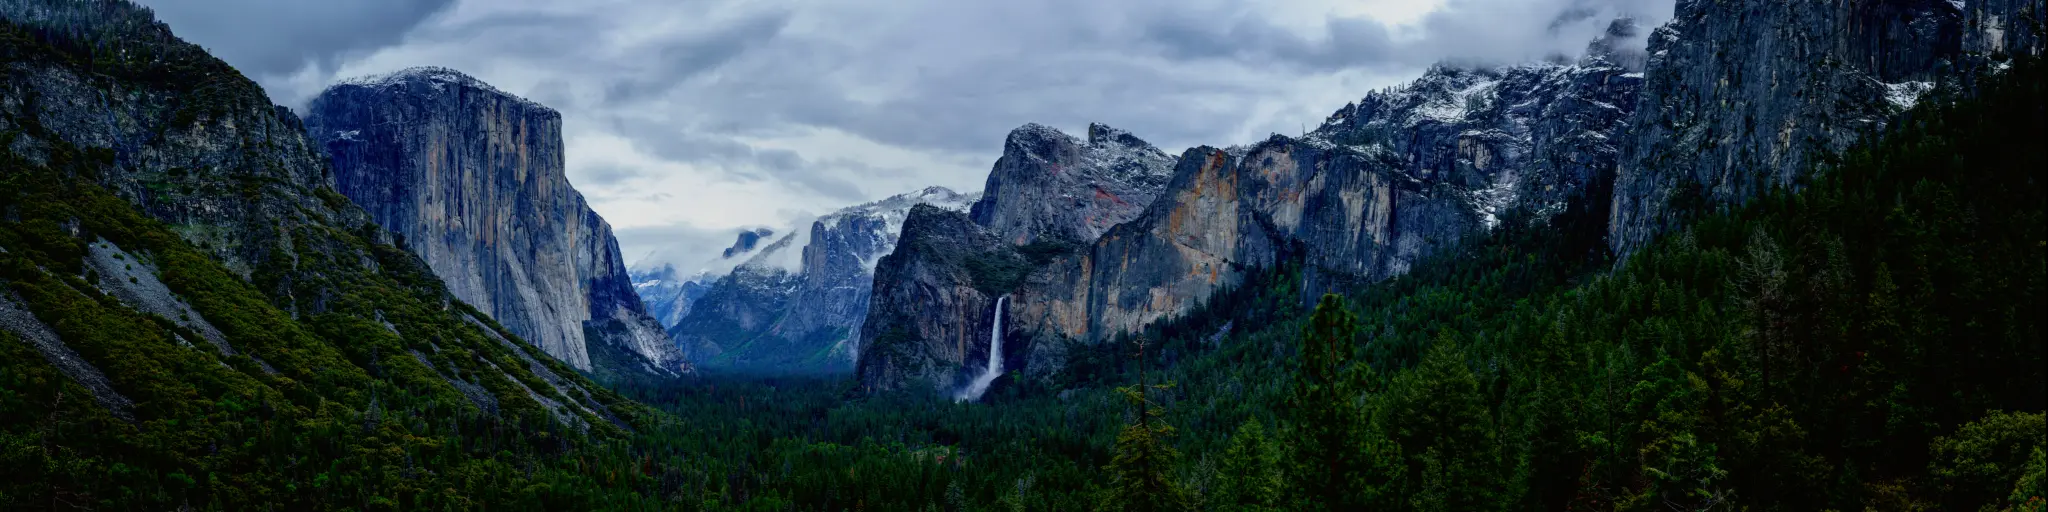 A breathtaking view of Rock formations, waterfall, and pine trees in Yosemite National Park on a gloomy afternoon